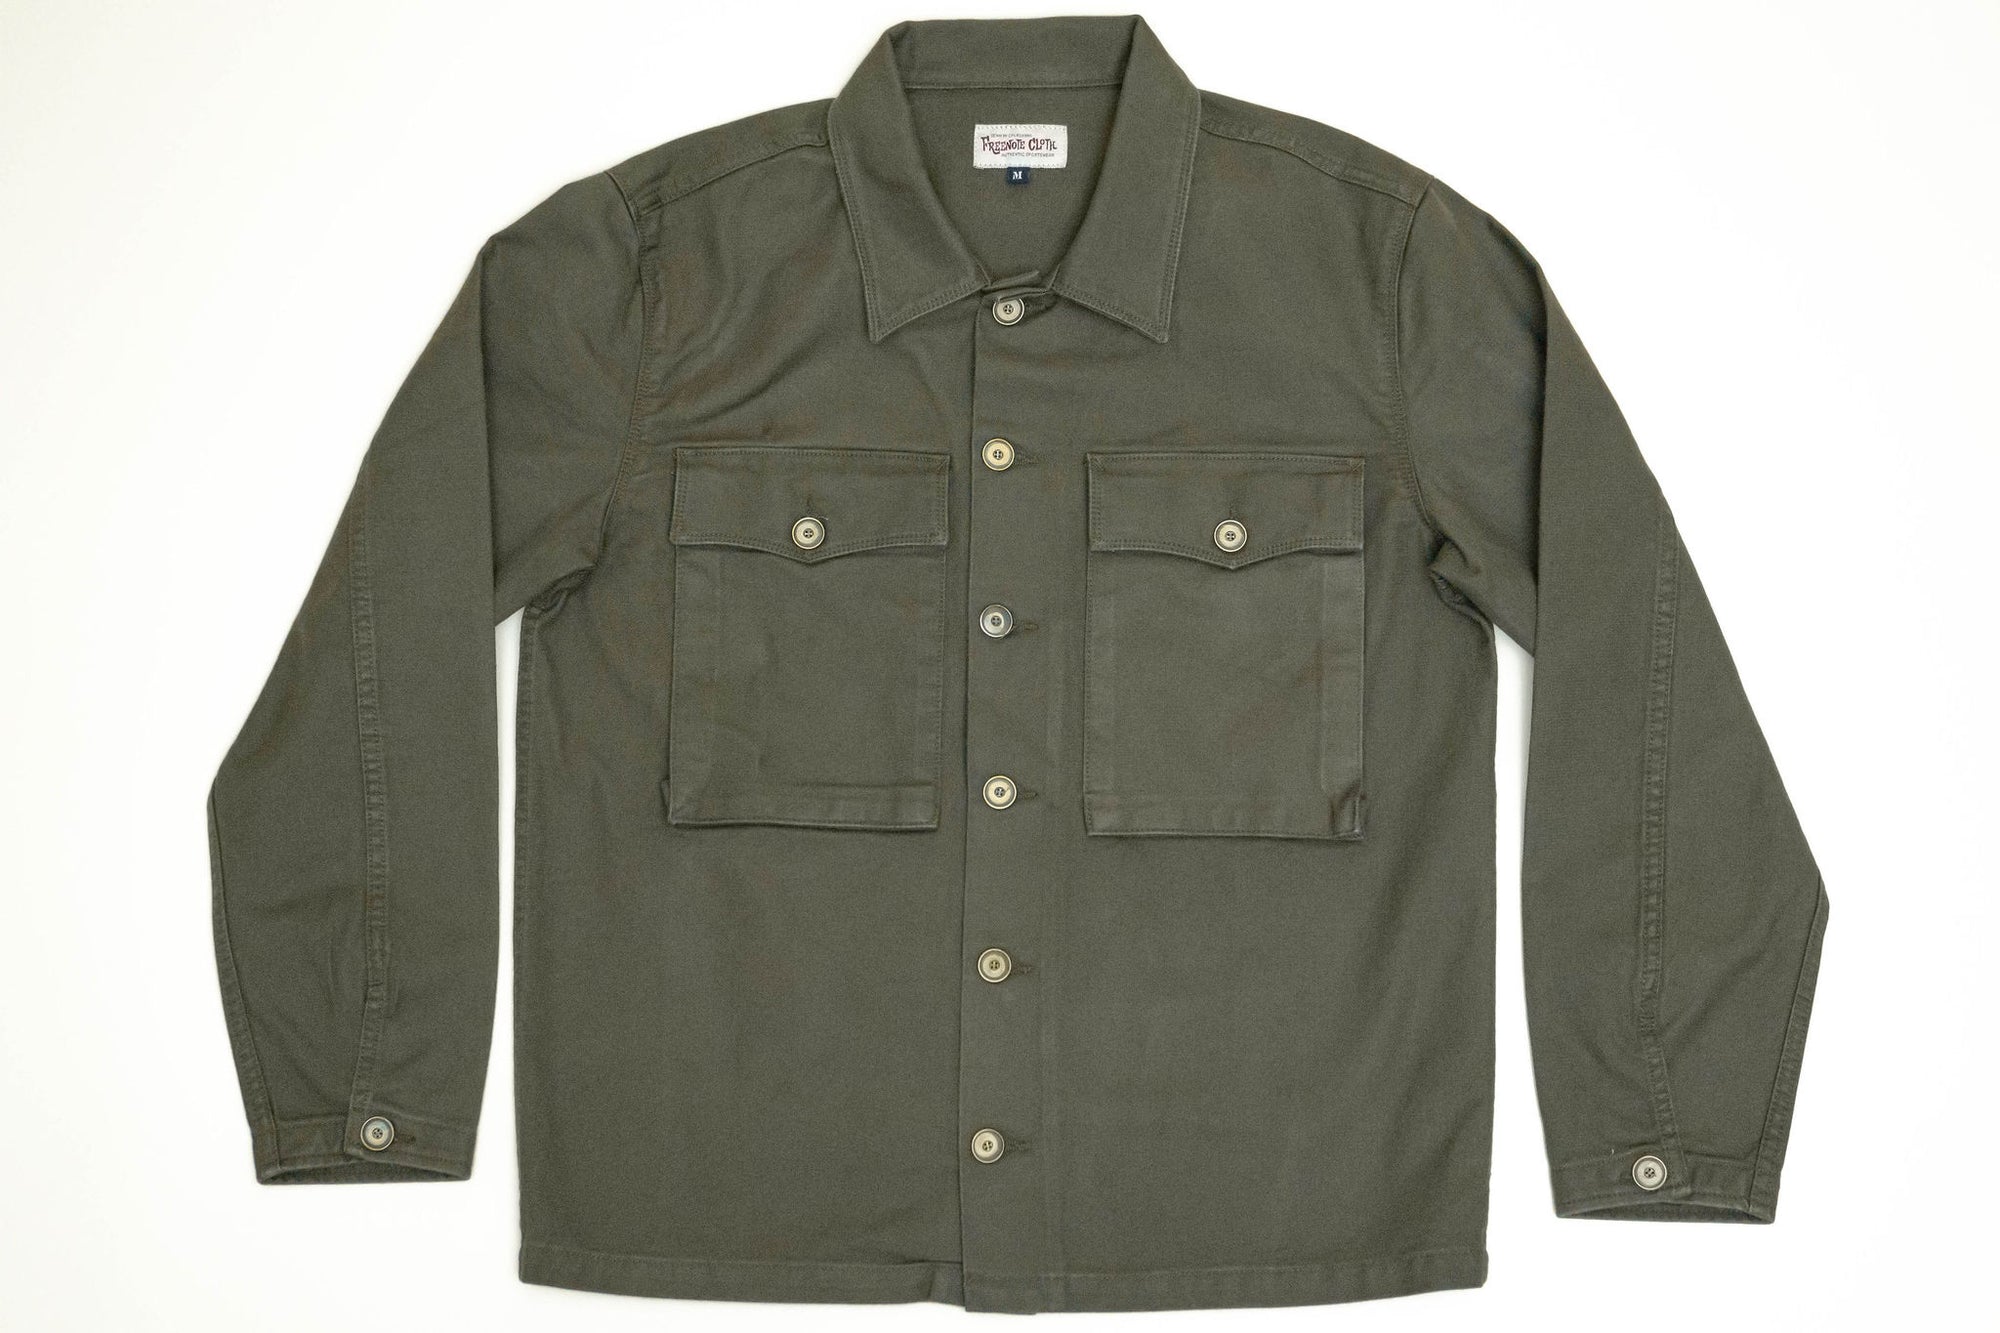 Freenote Cloth Midway - Olive